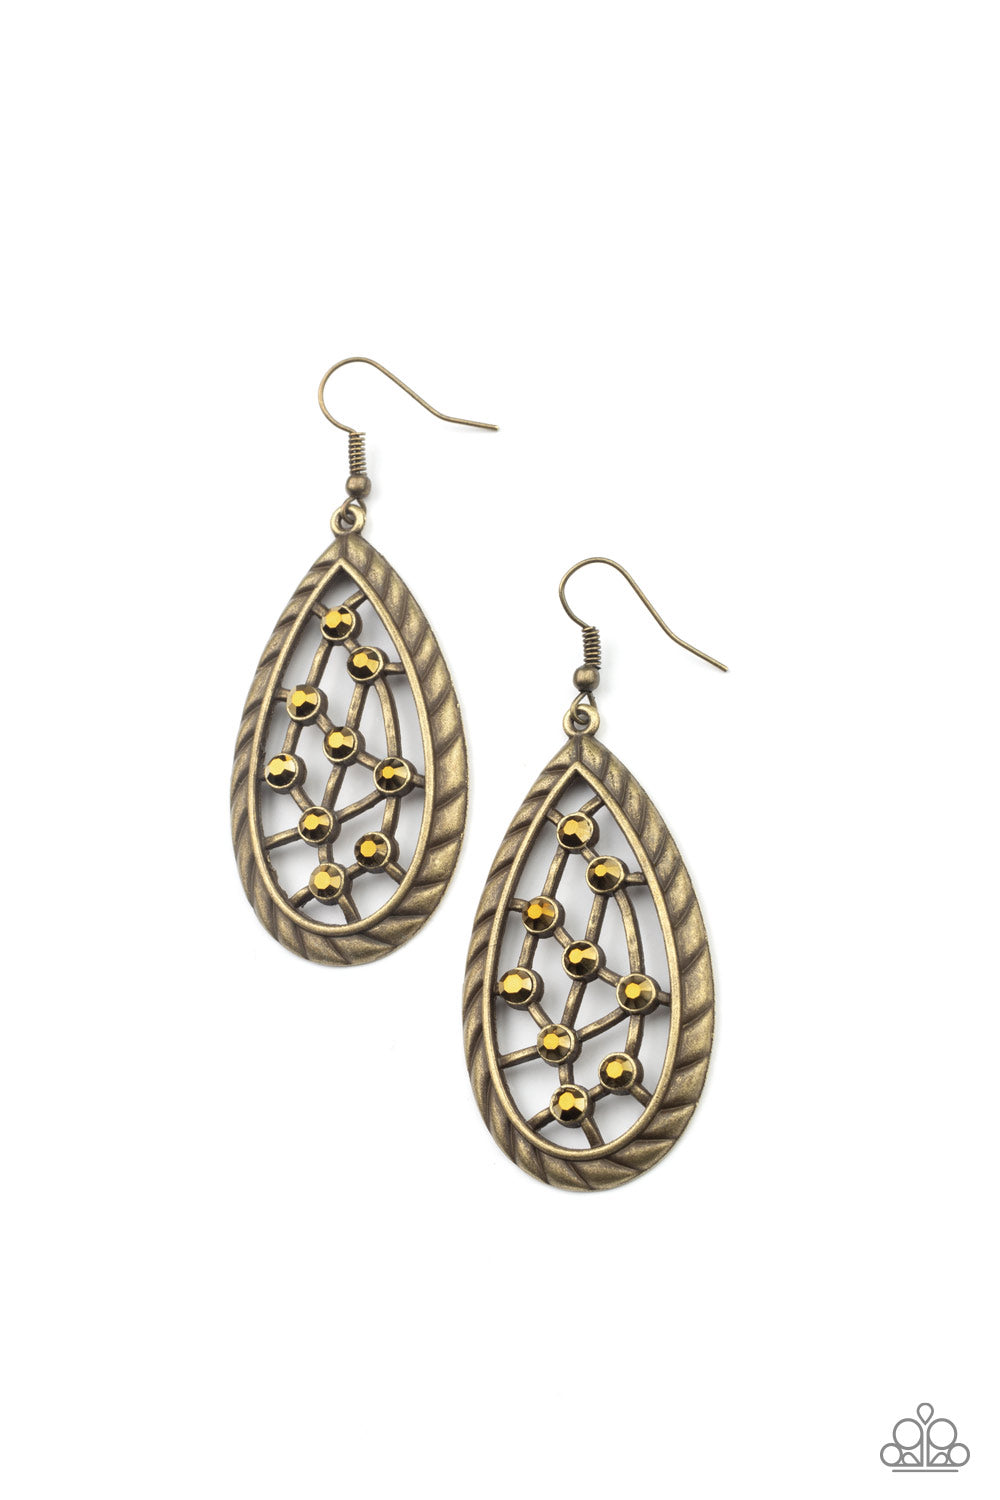 A gritty collection of dainty aurum rhinestones adorn hammered brass bars streaking across the airy center of an antiqued textured teardrop, creating a rustic fashion. Earring attaches to a standard fishhook fitting.